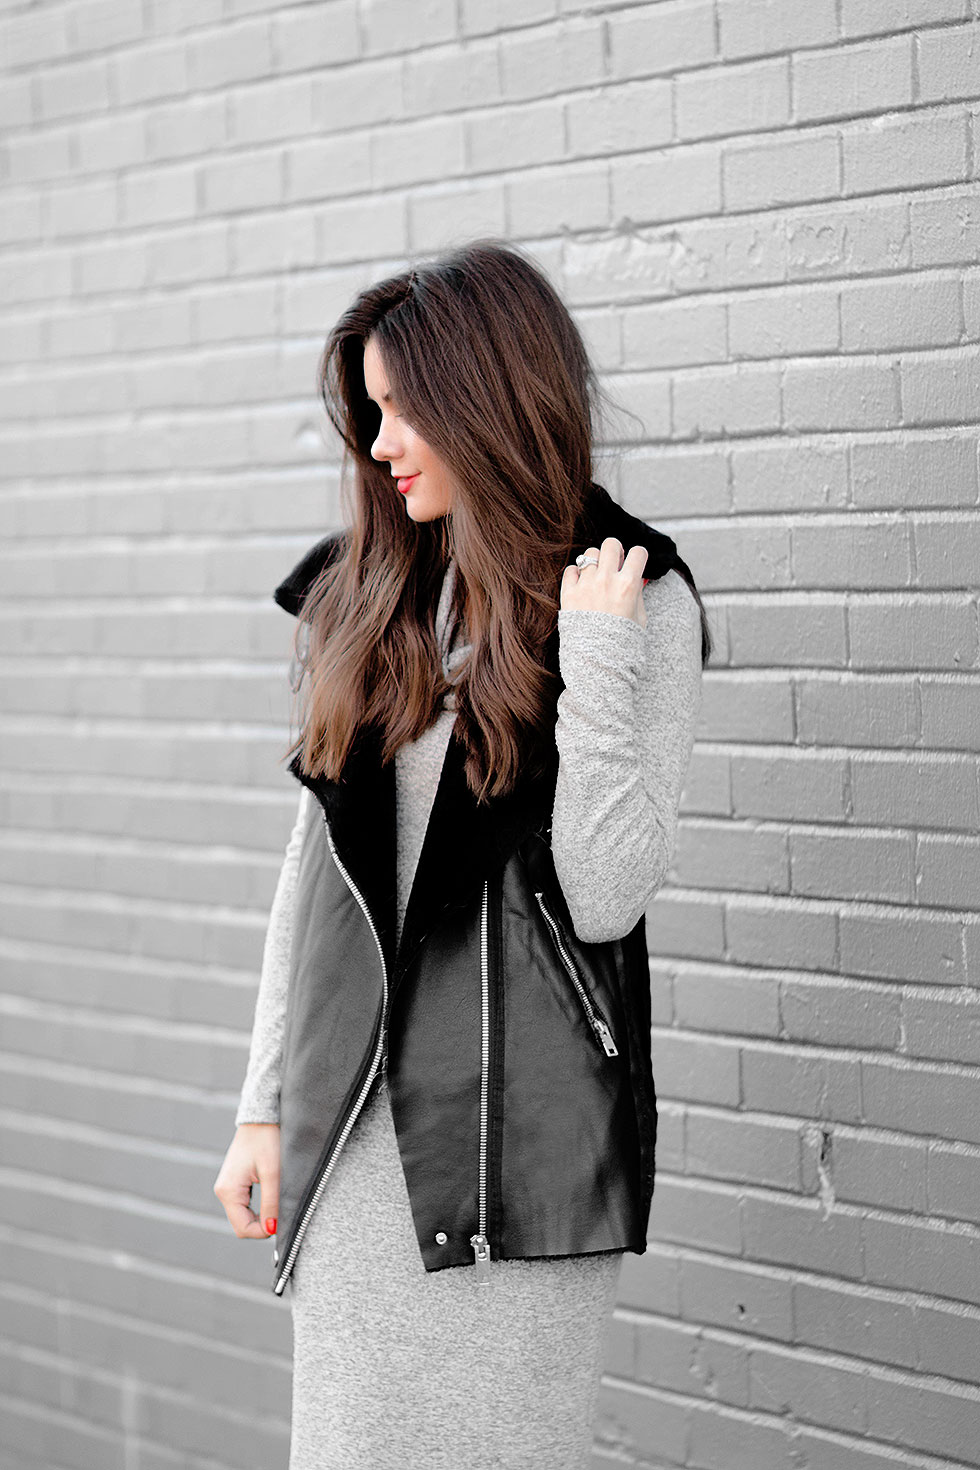 Shearling Leather Biker Vest, Heathered knit cowl neck sweater dress midi length, How To Do Weekend Minimalist Dressing